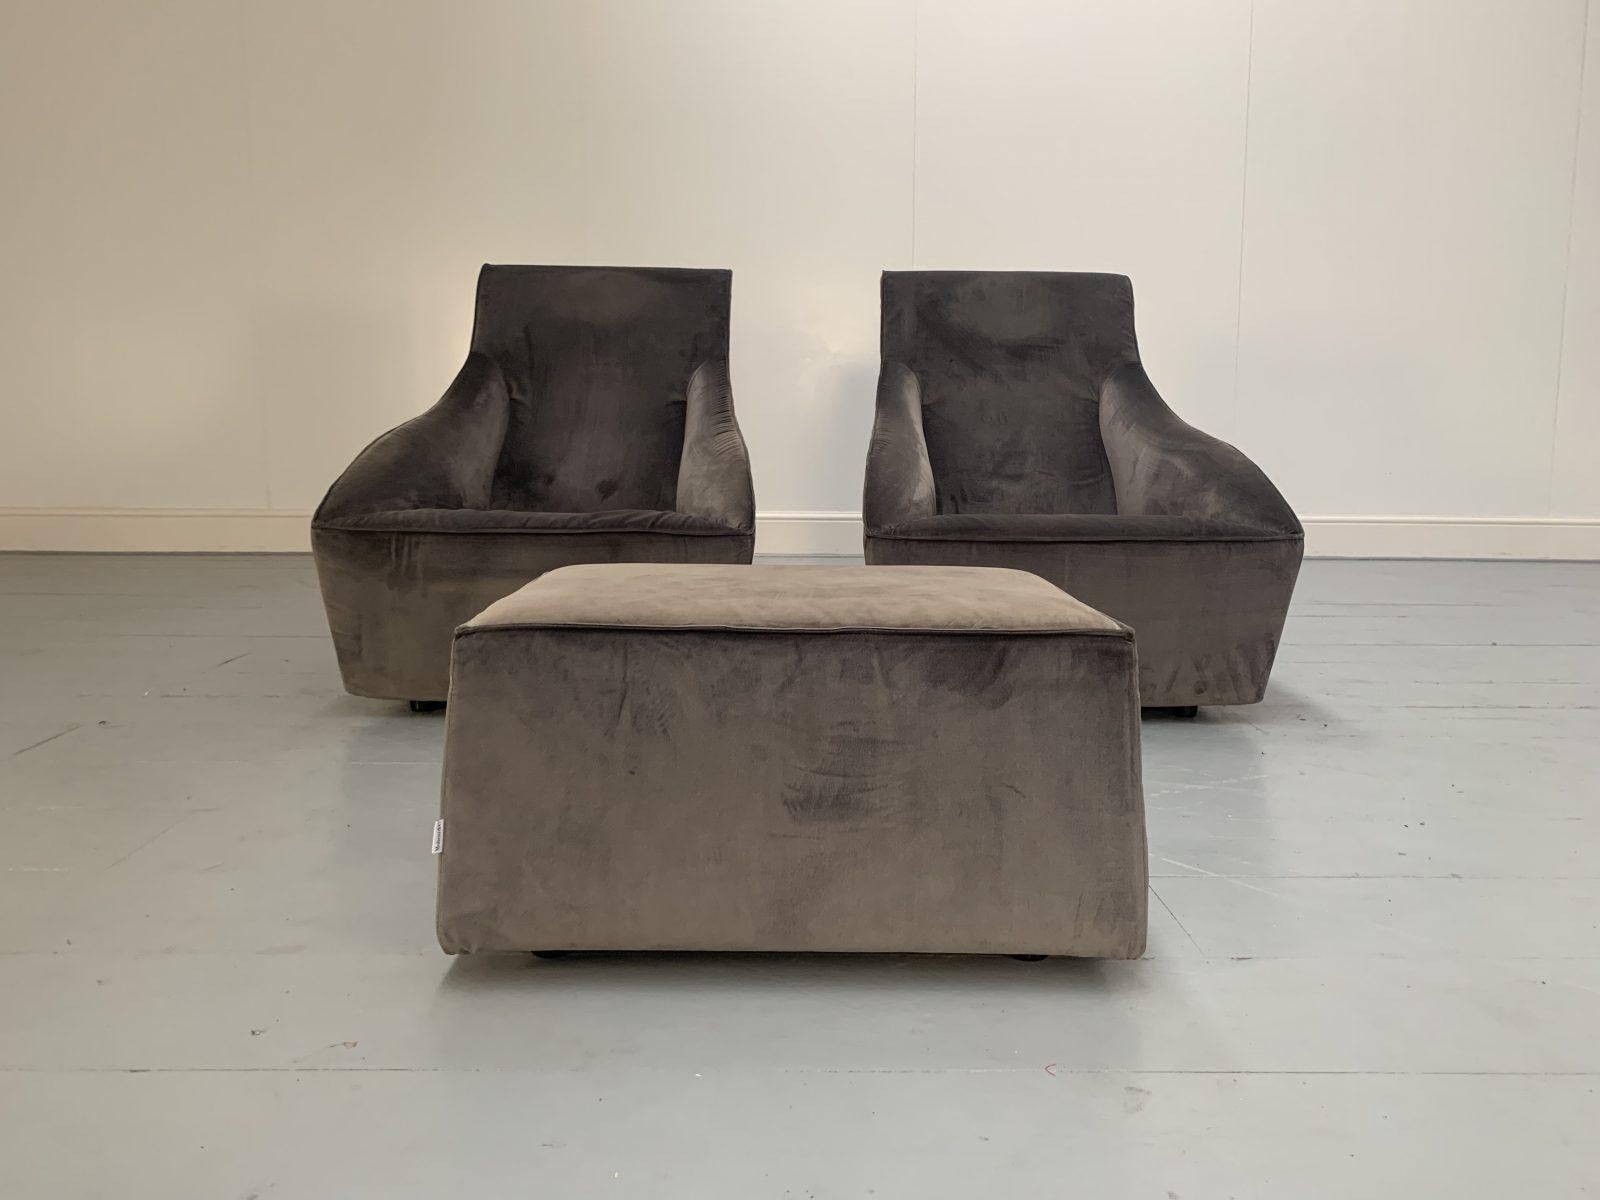 This is a superb, beautifully-presented pair of the iconic “Doda” Rotating/Swivel Armchairs and Ottoman in a stunning dark-grey Alcantara, manufactured by the leading Italian Furniture House, Molteni & C.

In a world of temporary pleasures,